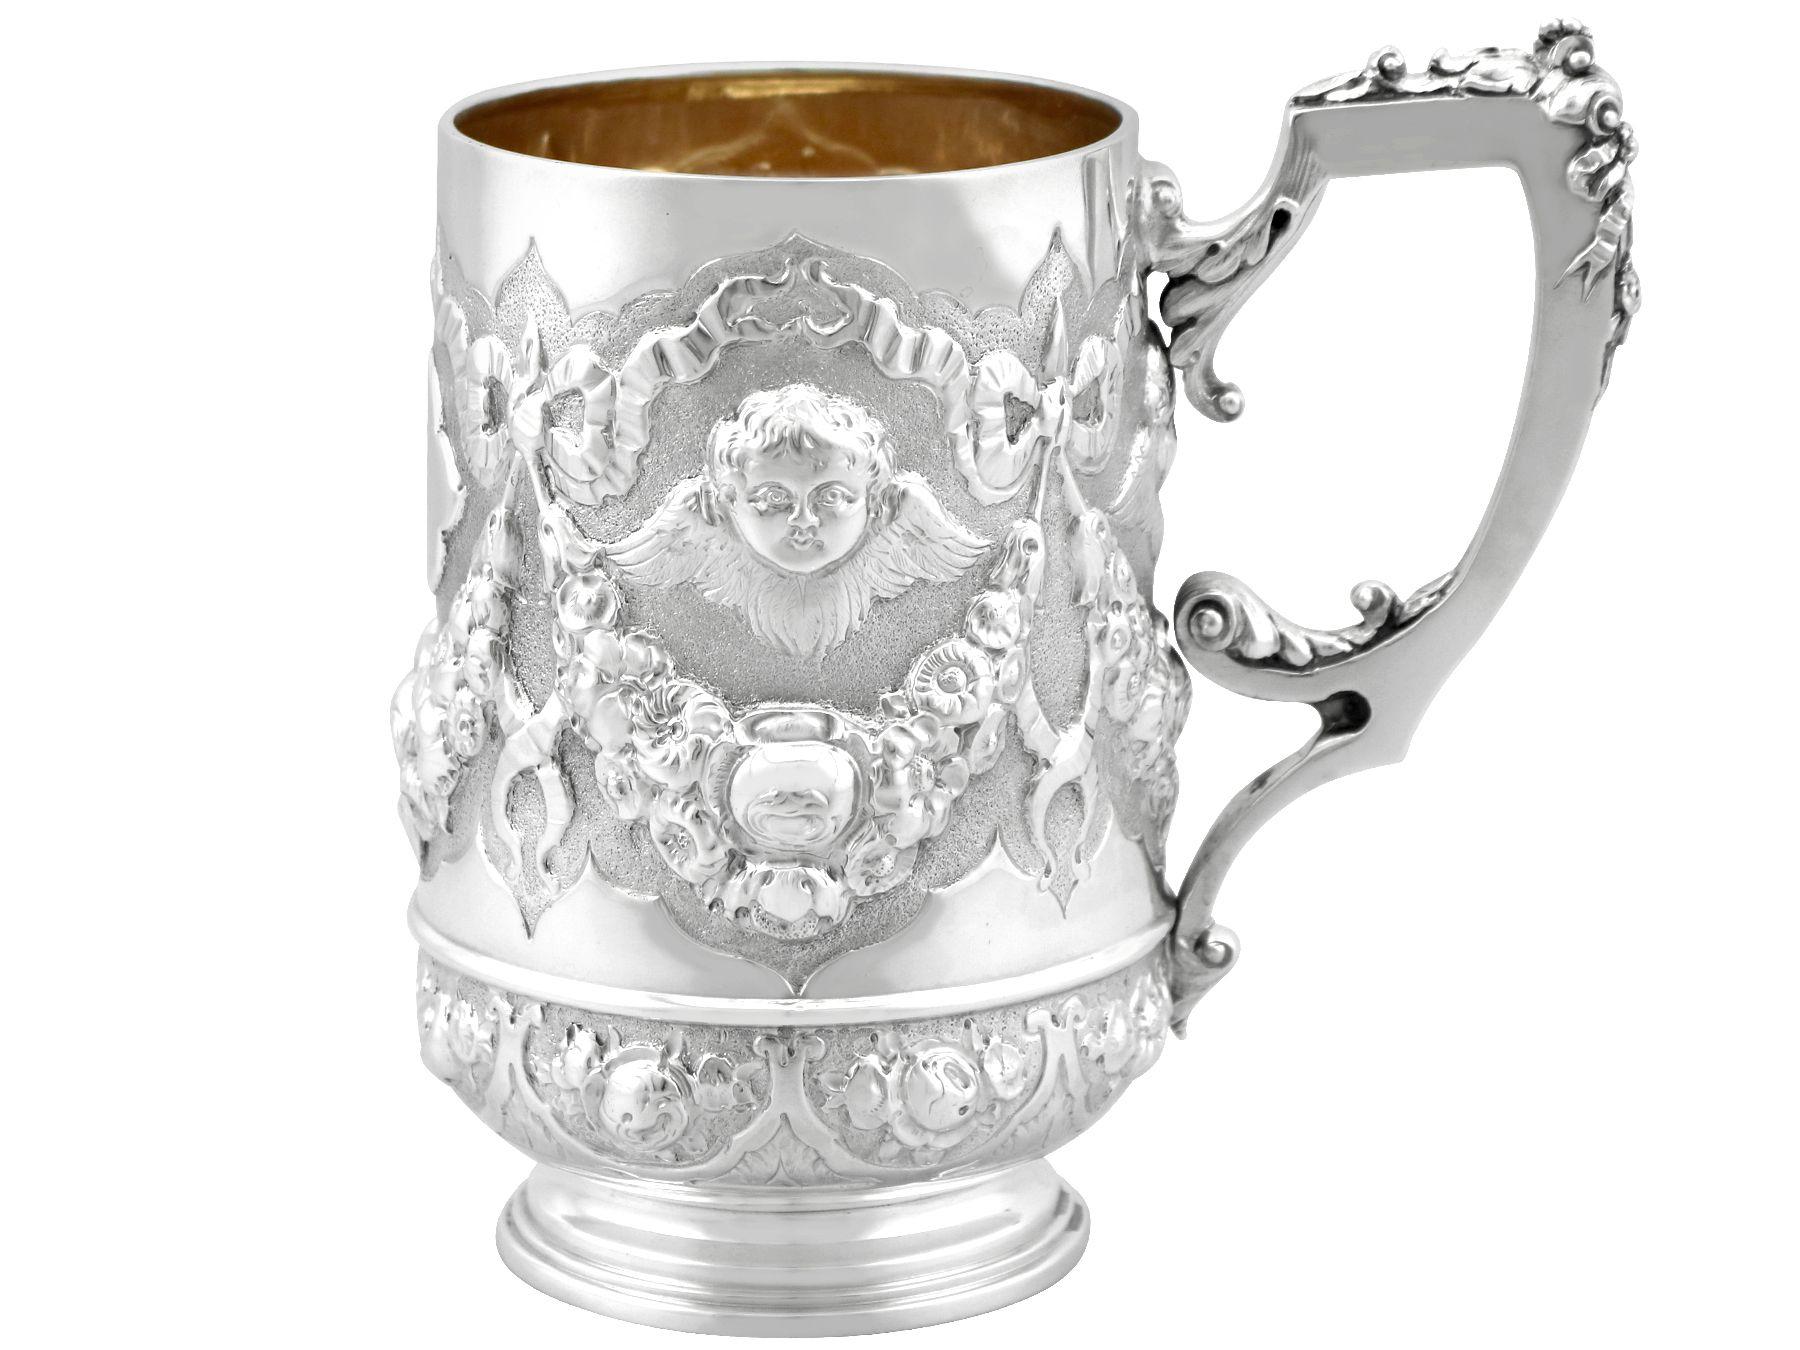 Antique Victorian 1886 Sterling Silver Christening Mug In Excellent Condition For Sale In Jesmond, Newcastle Upon Tyne